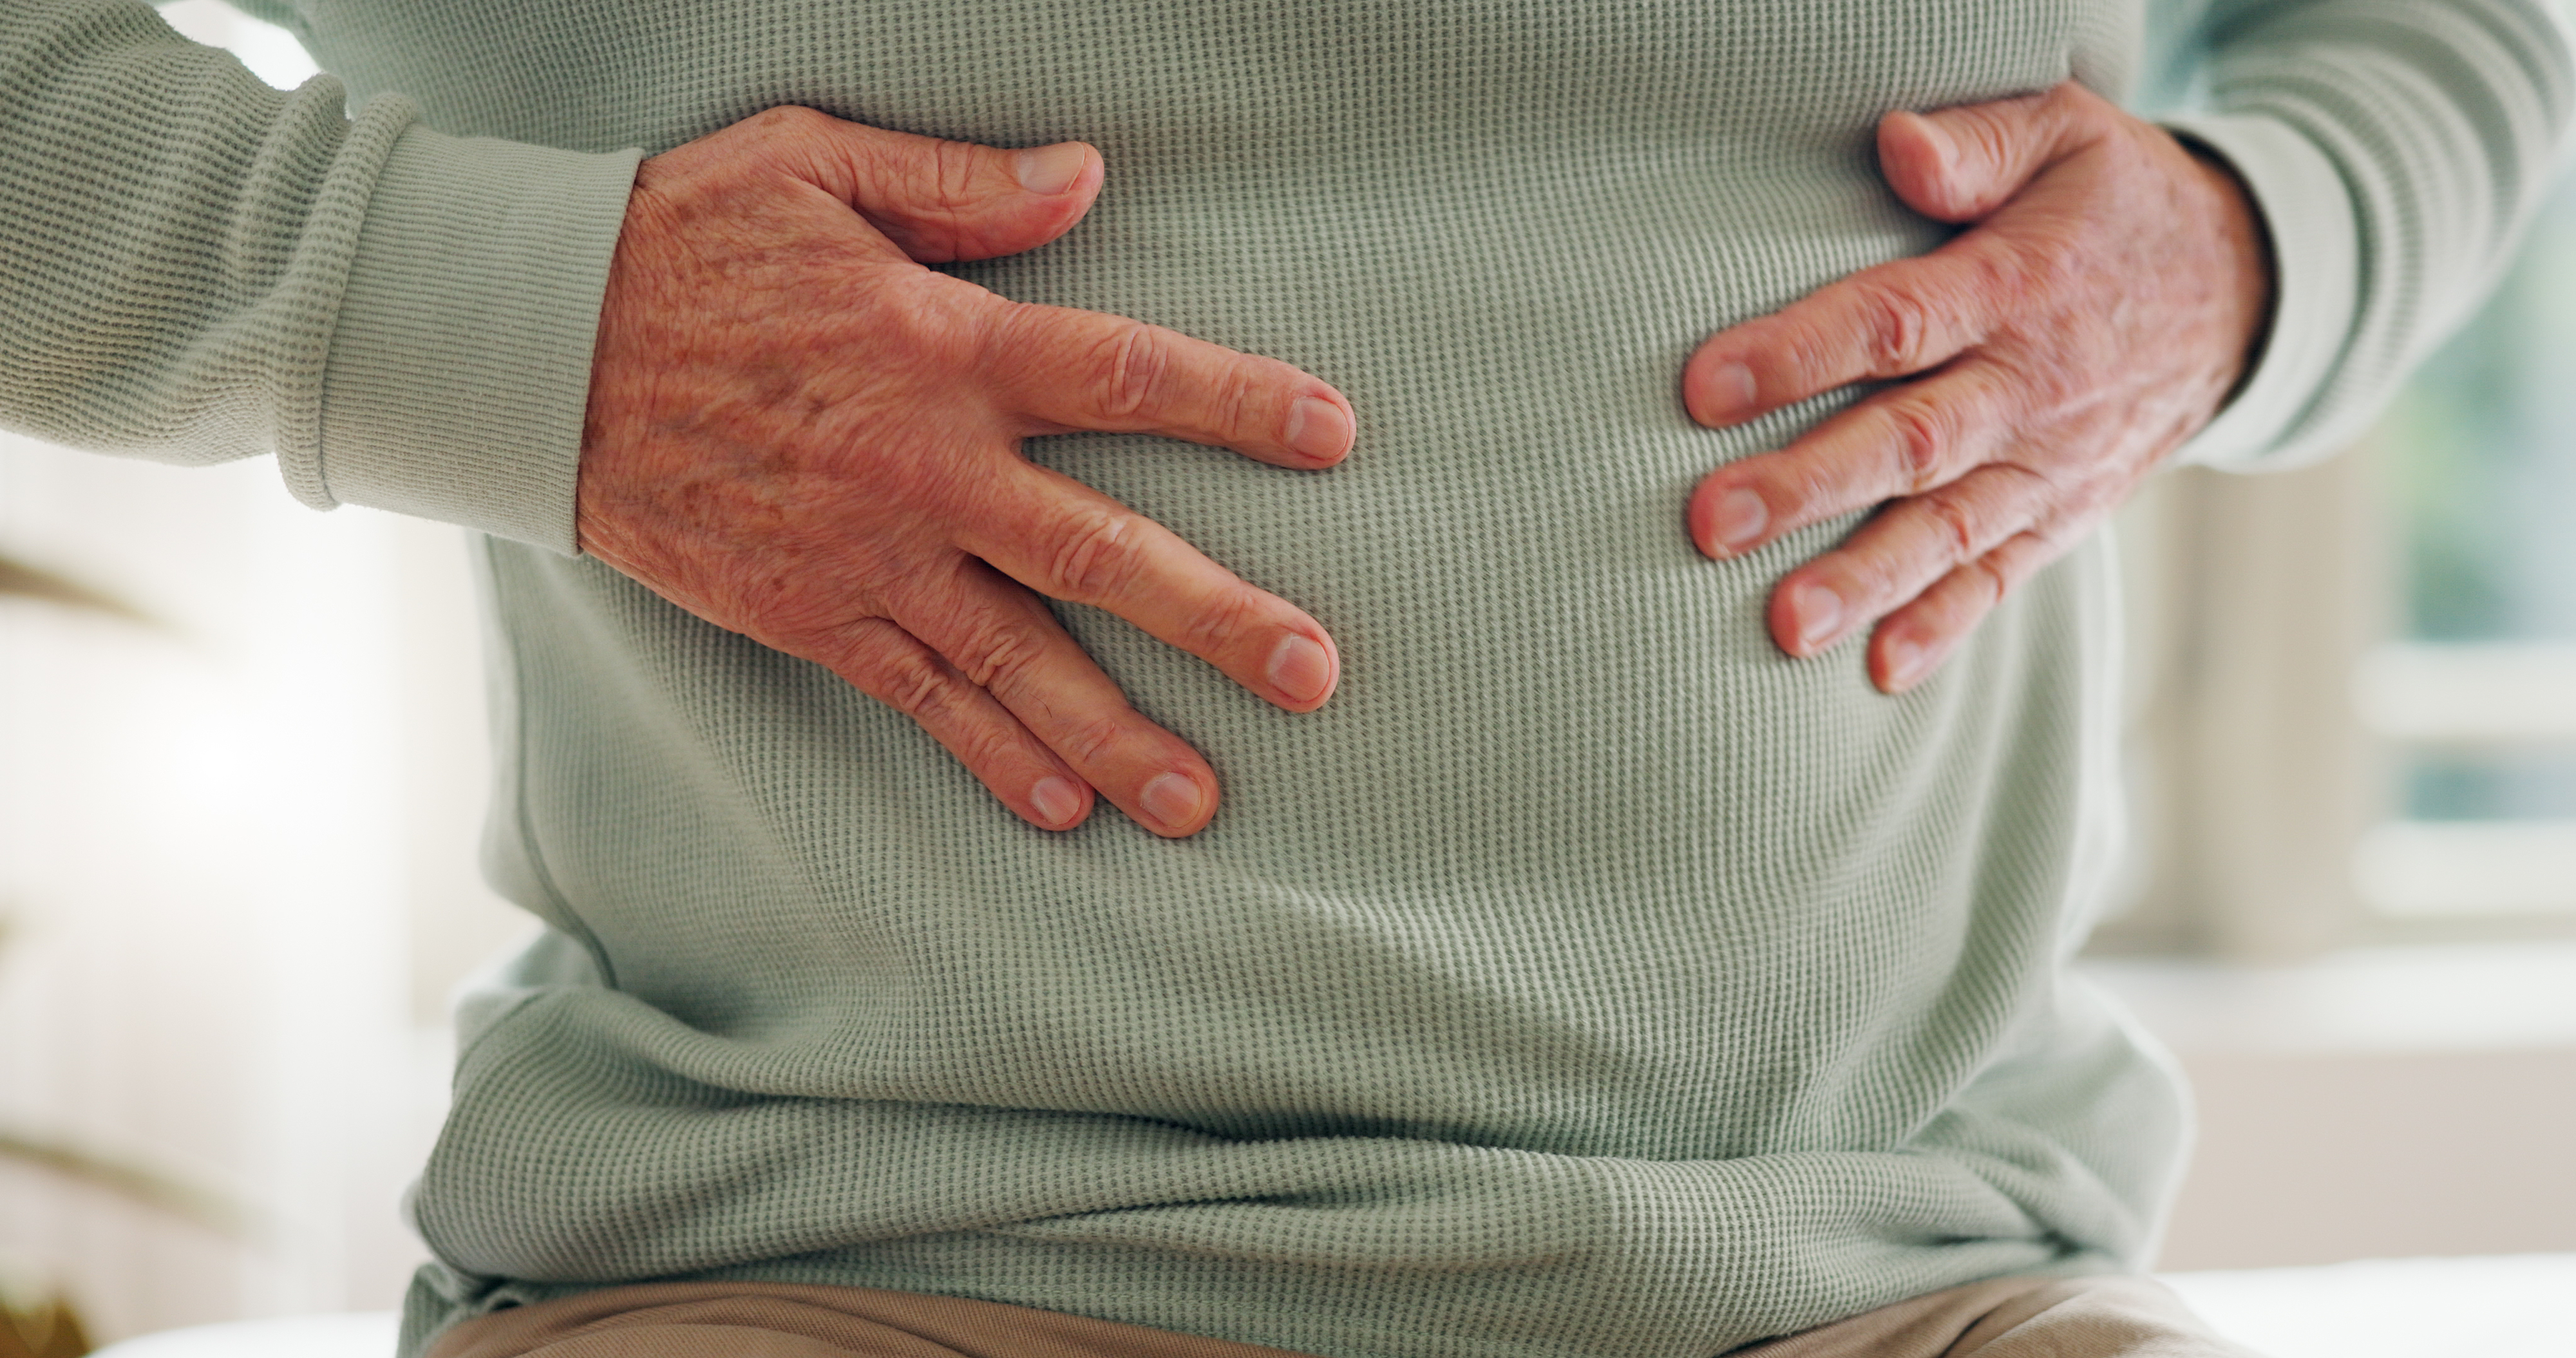 Person clutching their stomach, possibly indicating discomfort or fullness, relevant to a food-related context